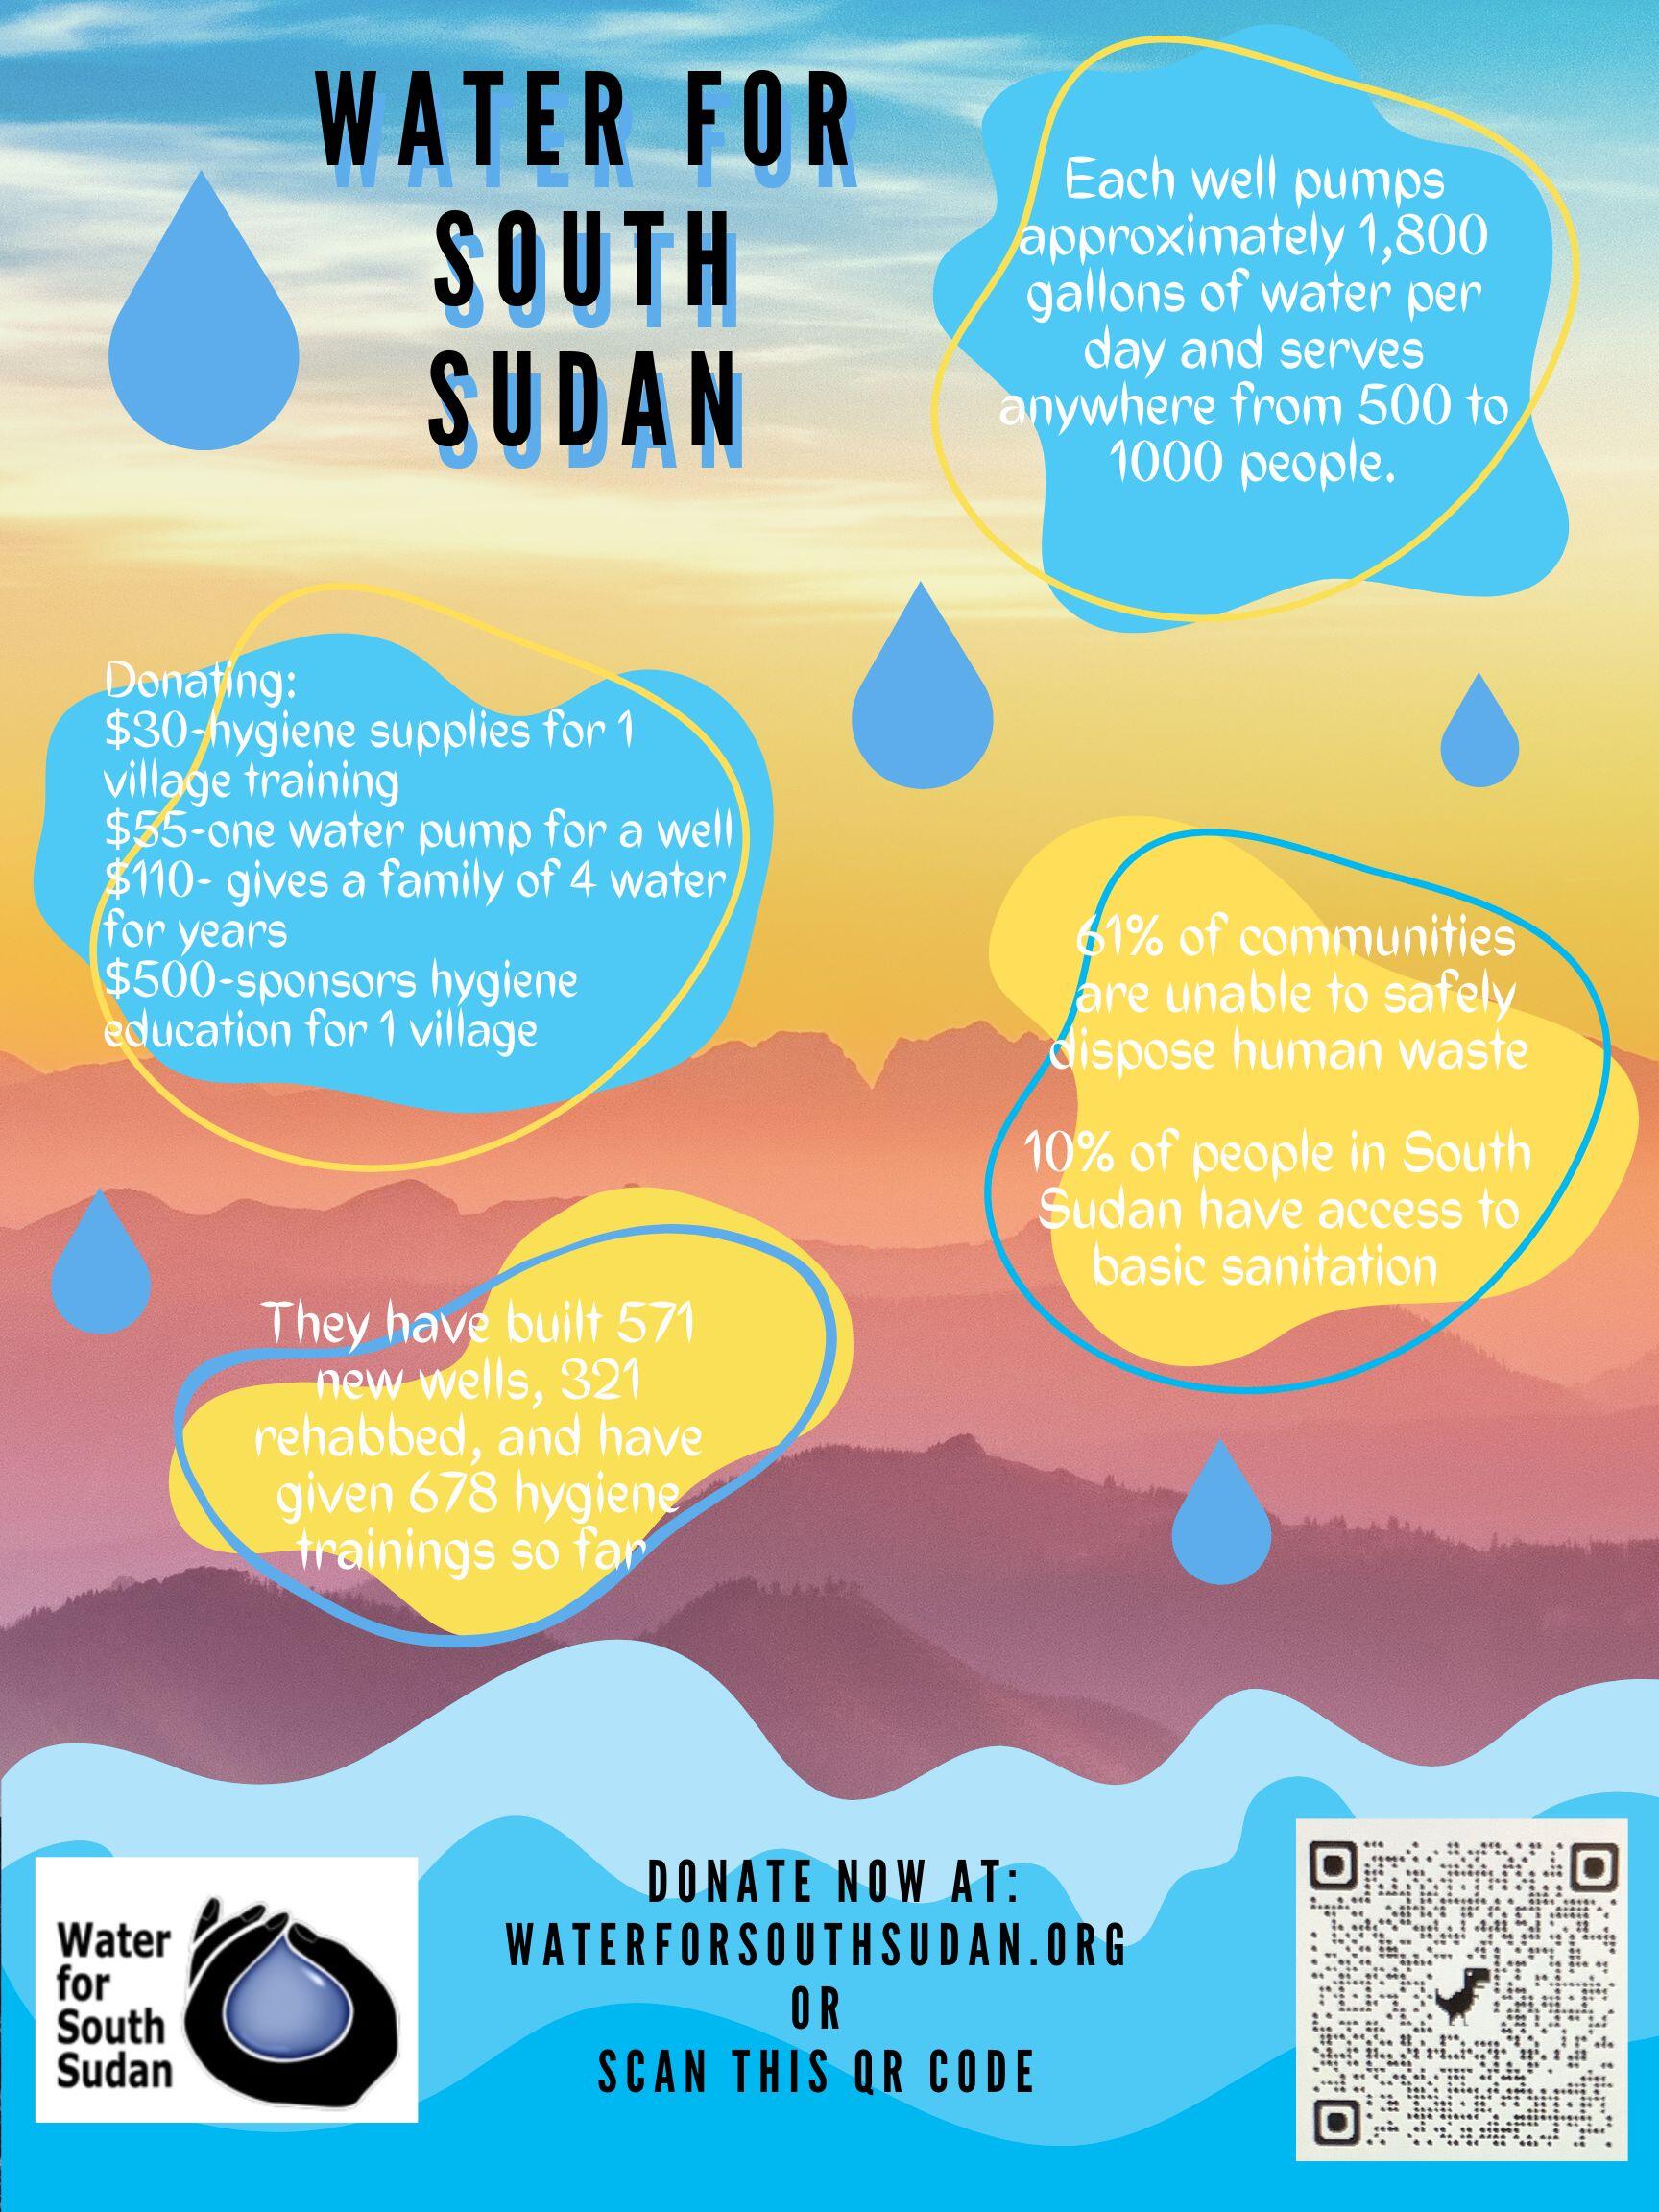 Second winner in the Water for South Sudan poster contest